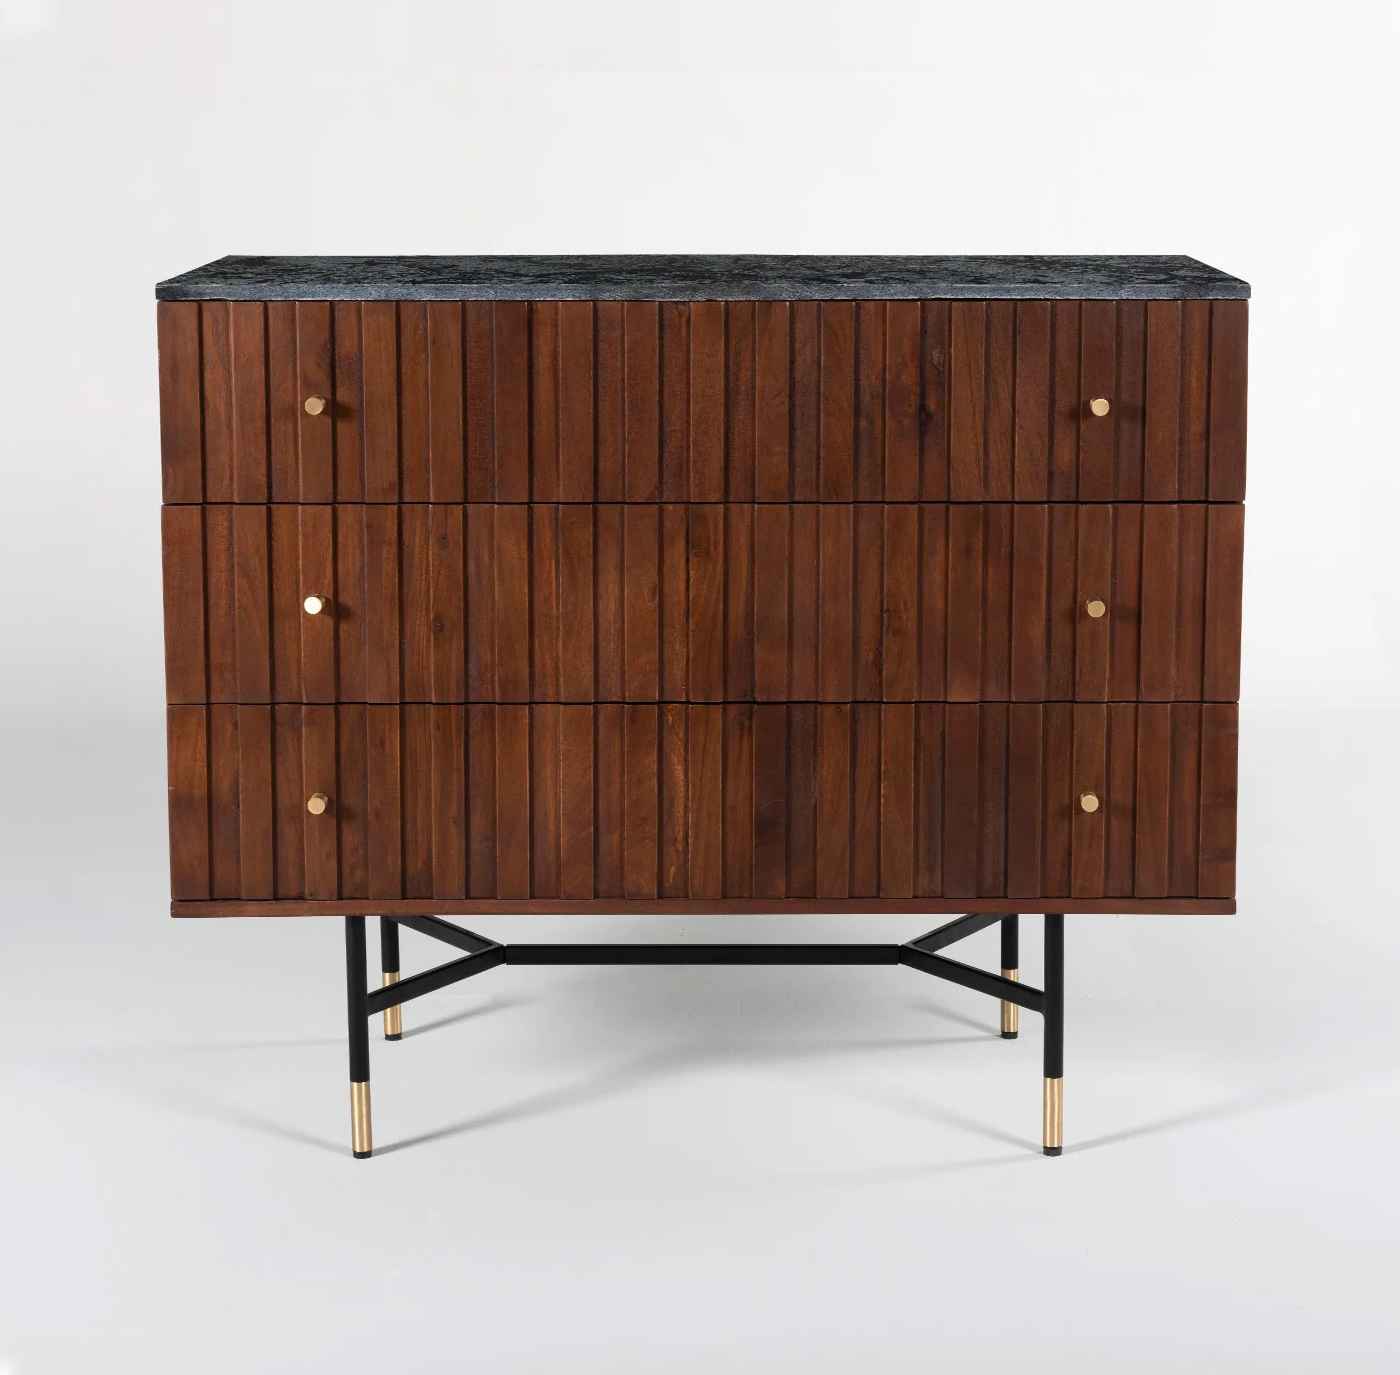 Olenna Sagrario Chest of Drawers